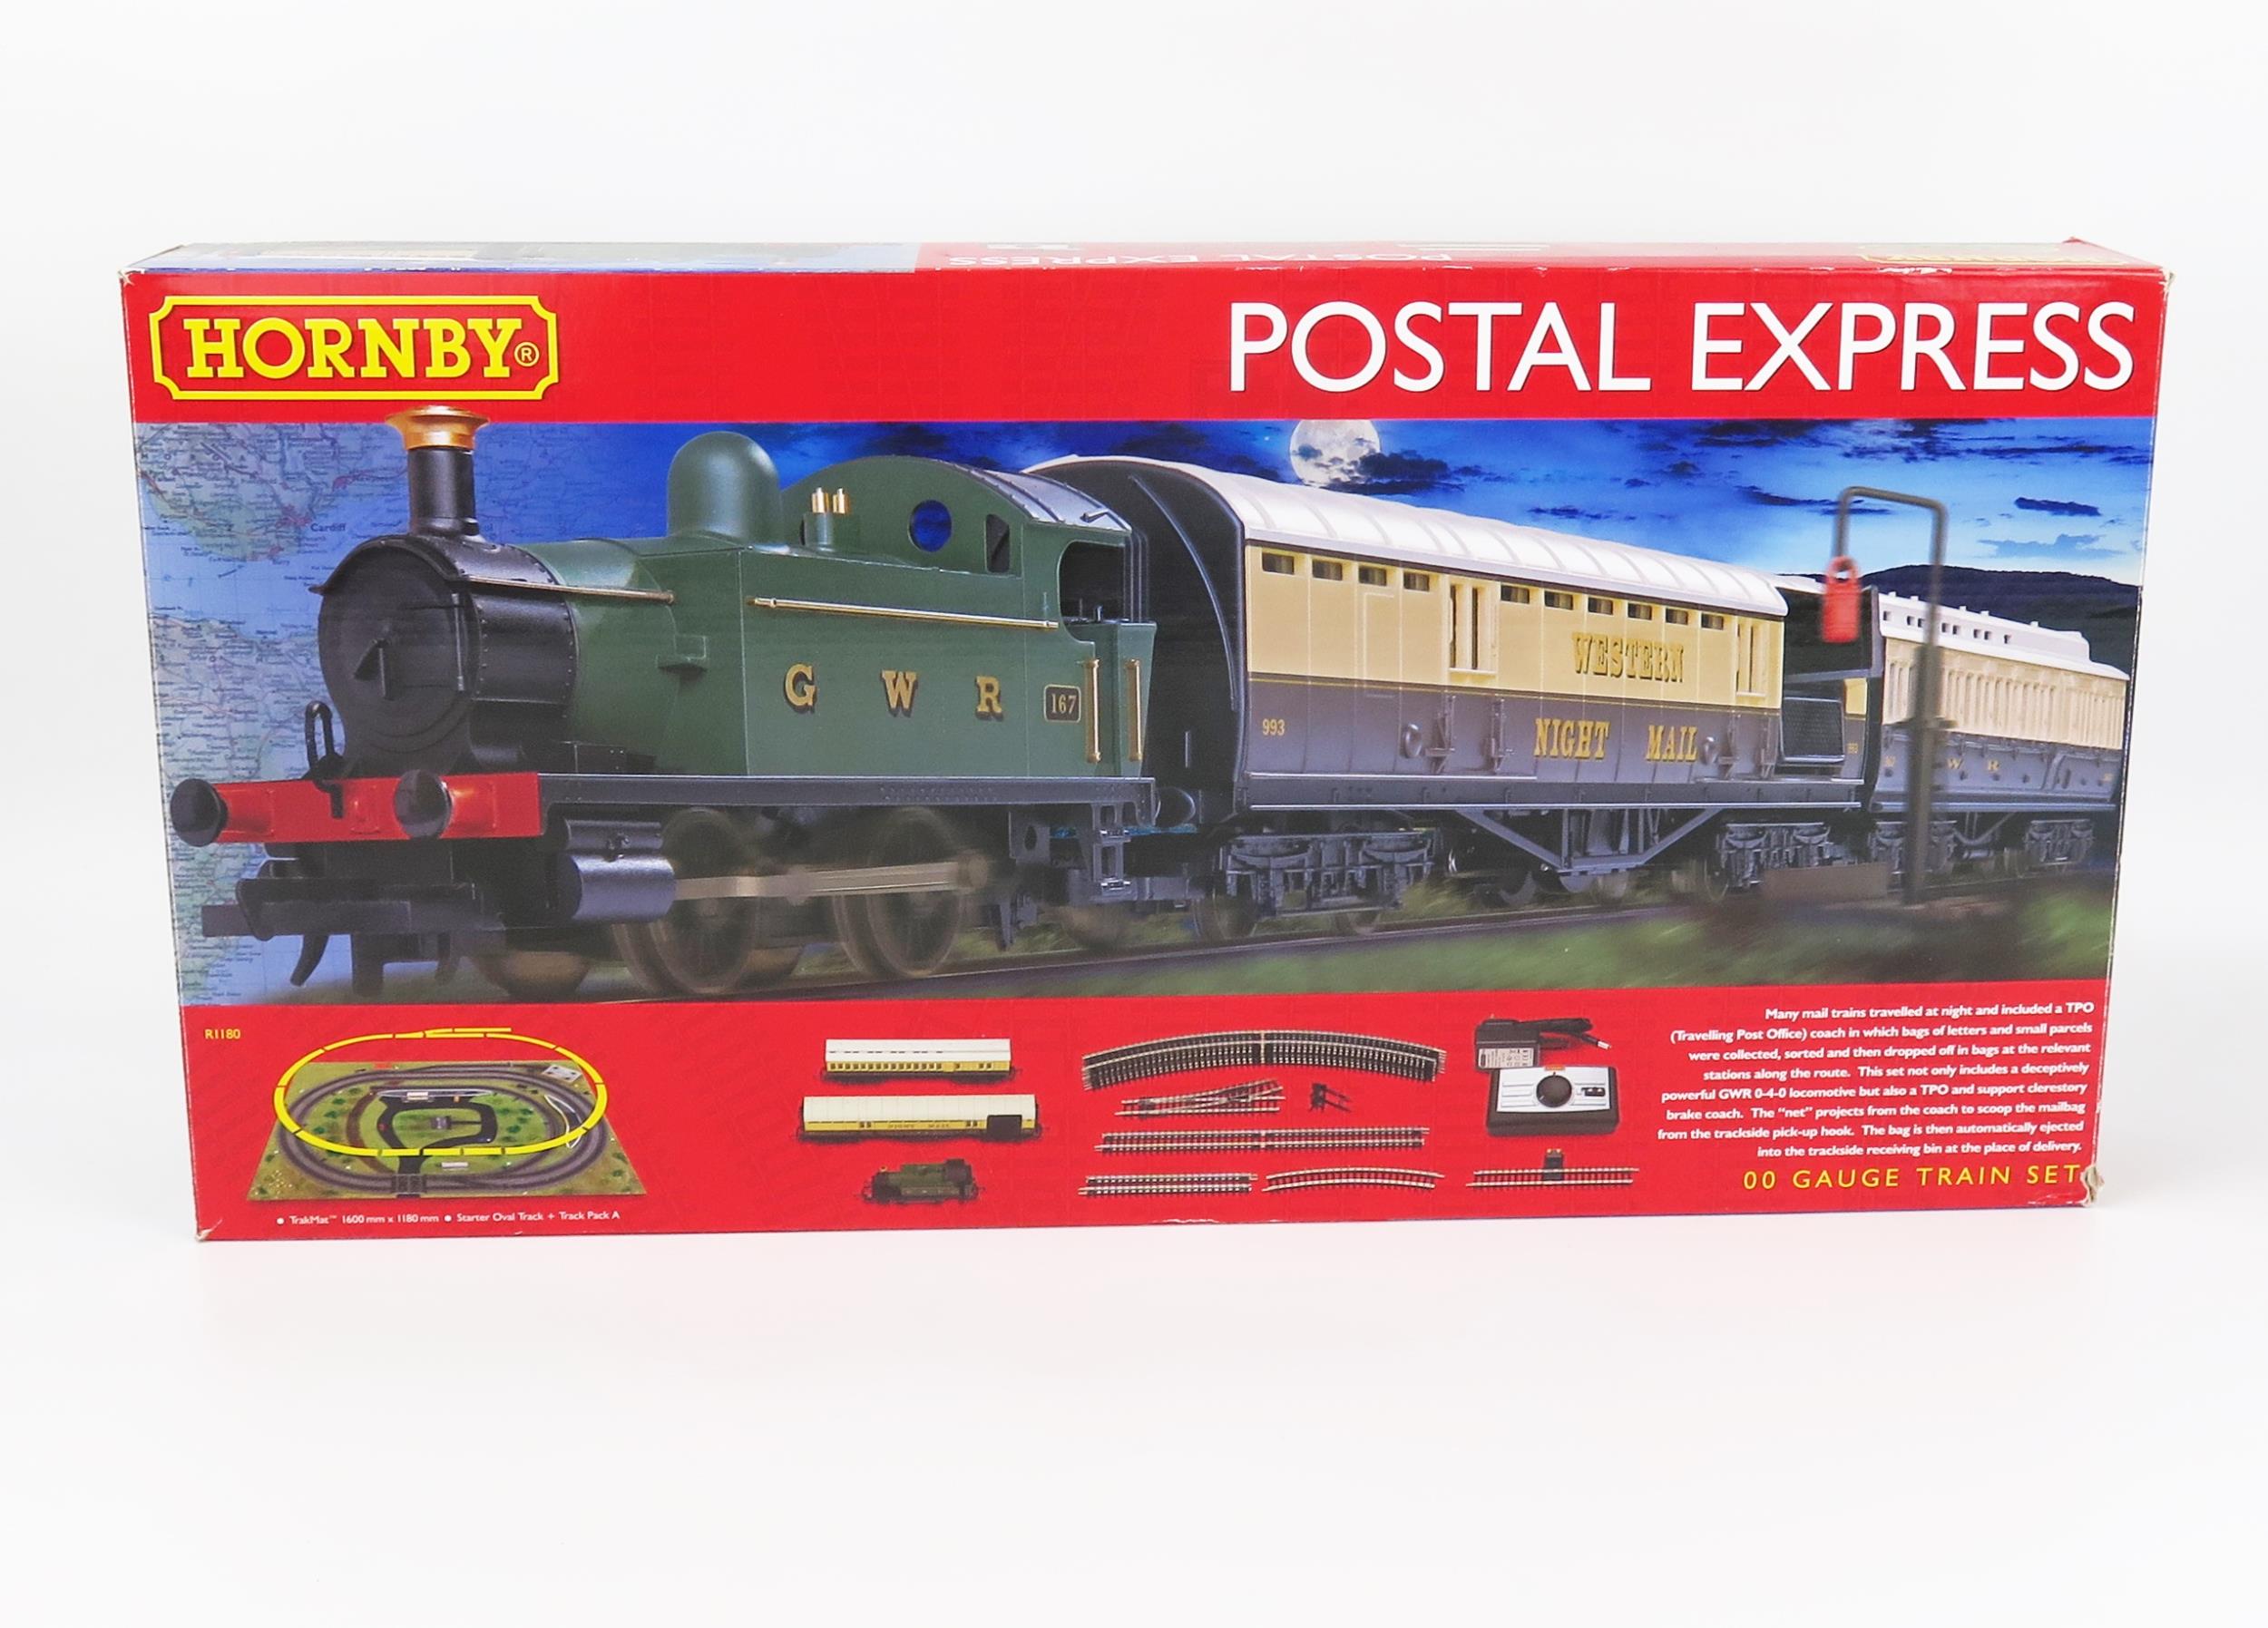 Hornby OO Gauge R1180 Postal Express with GWR 0-4-0 Loco - excellent in box